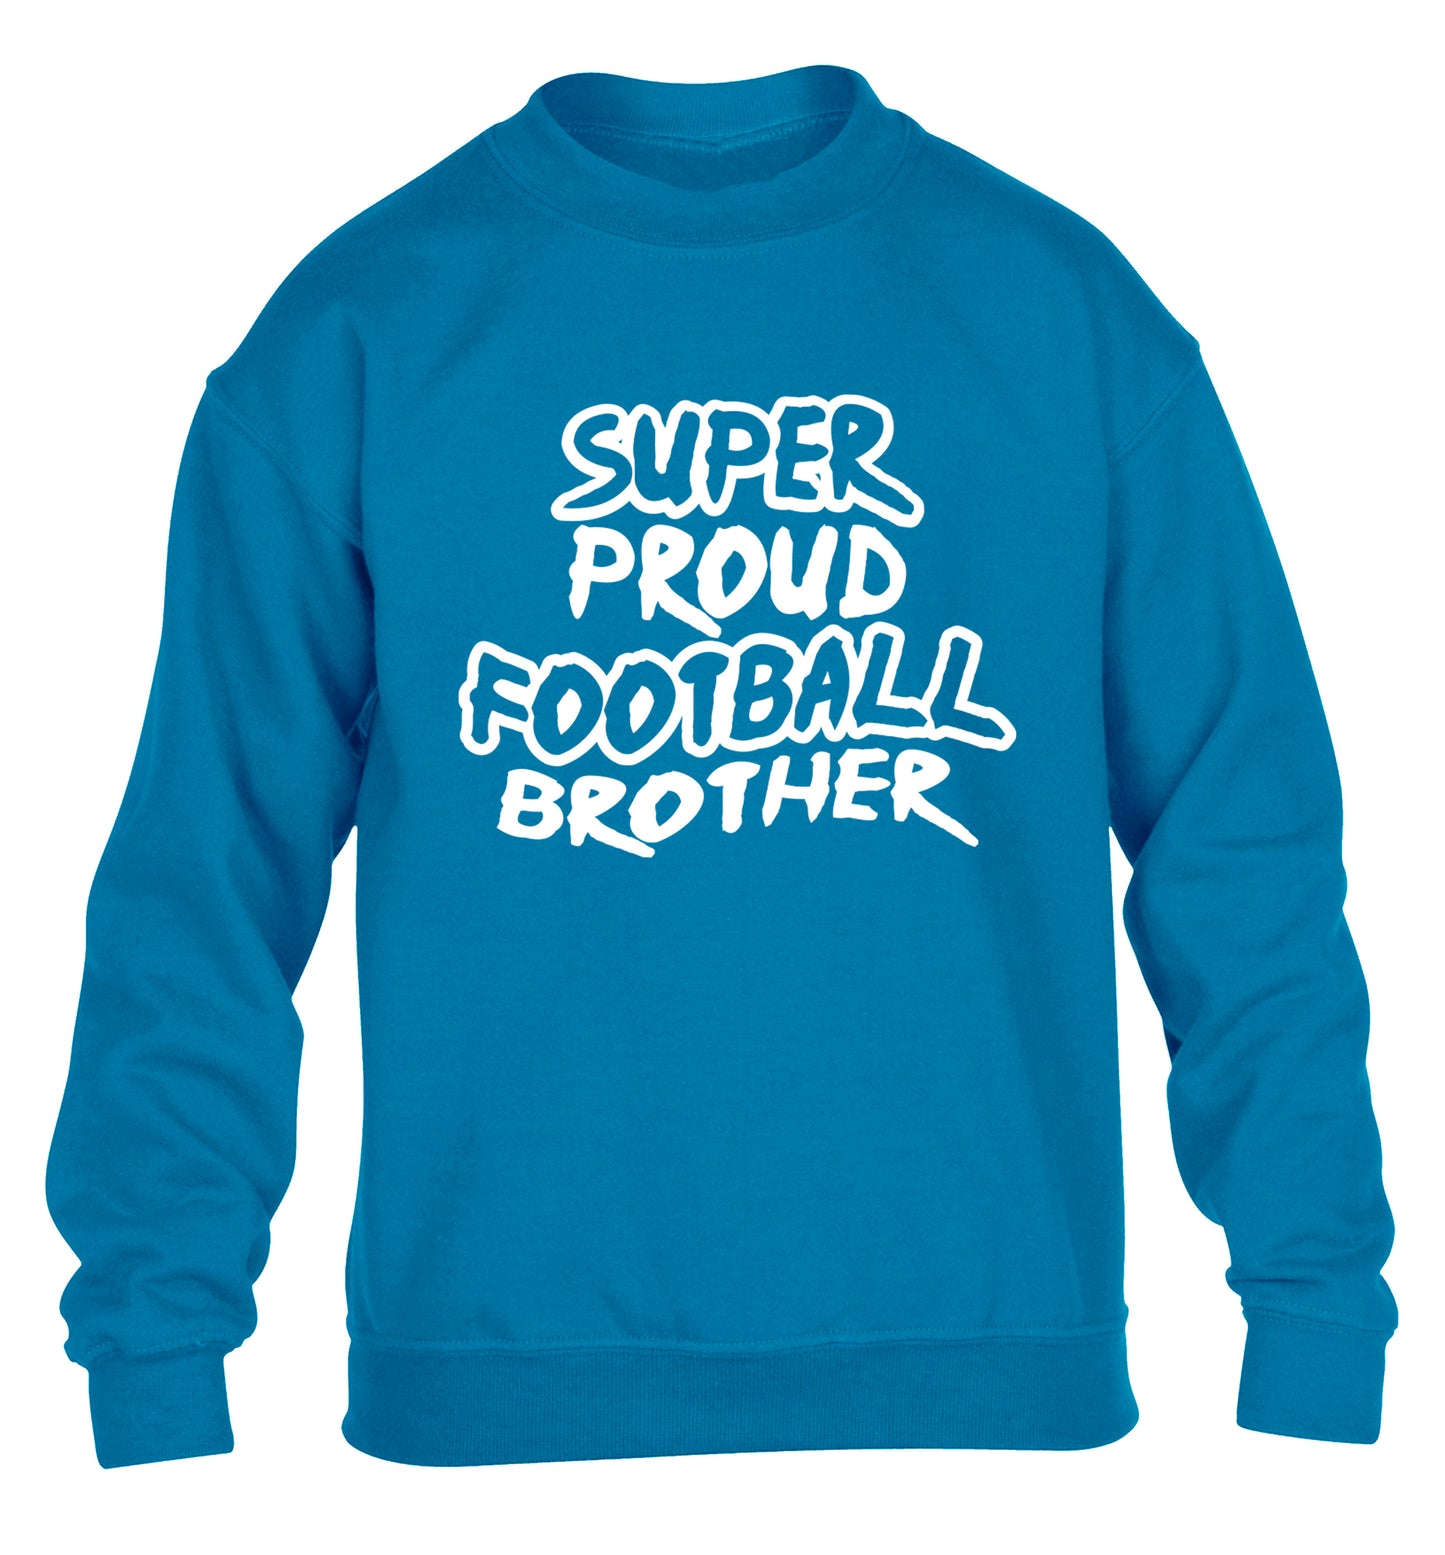 Super proud football brother children's blue sweater 12-14 Years